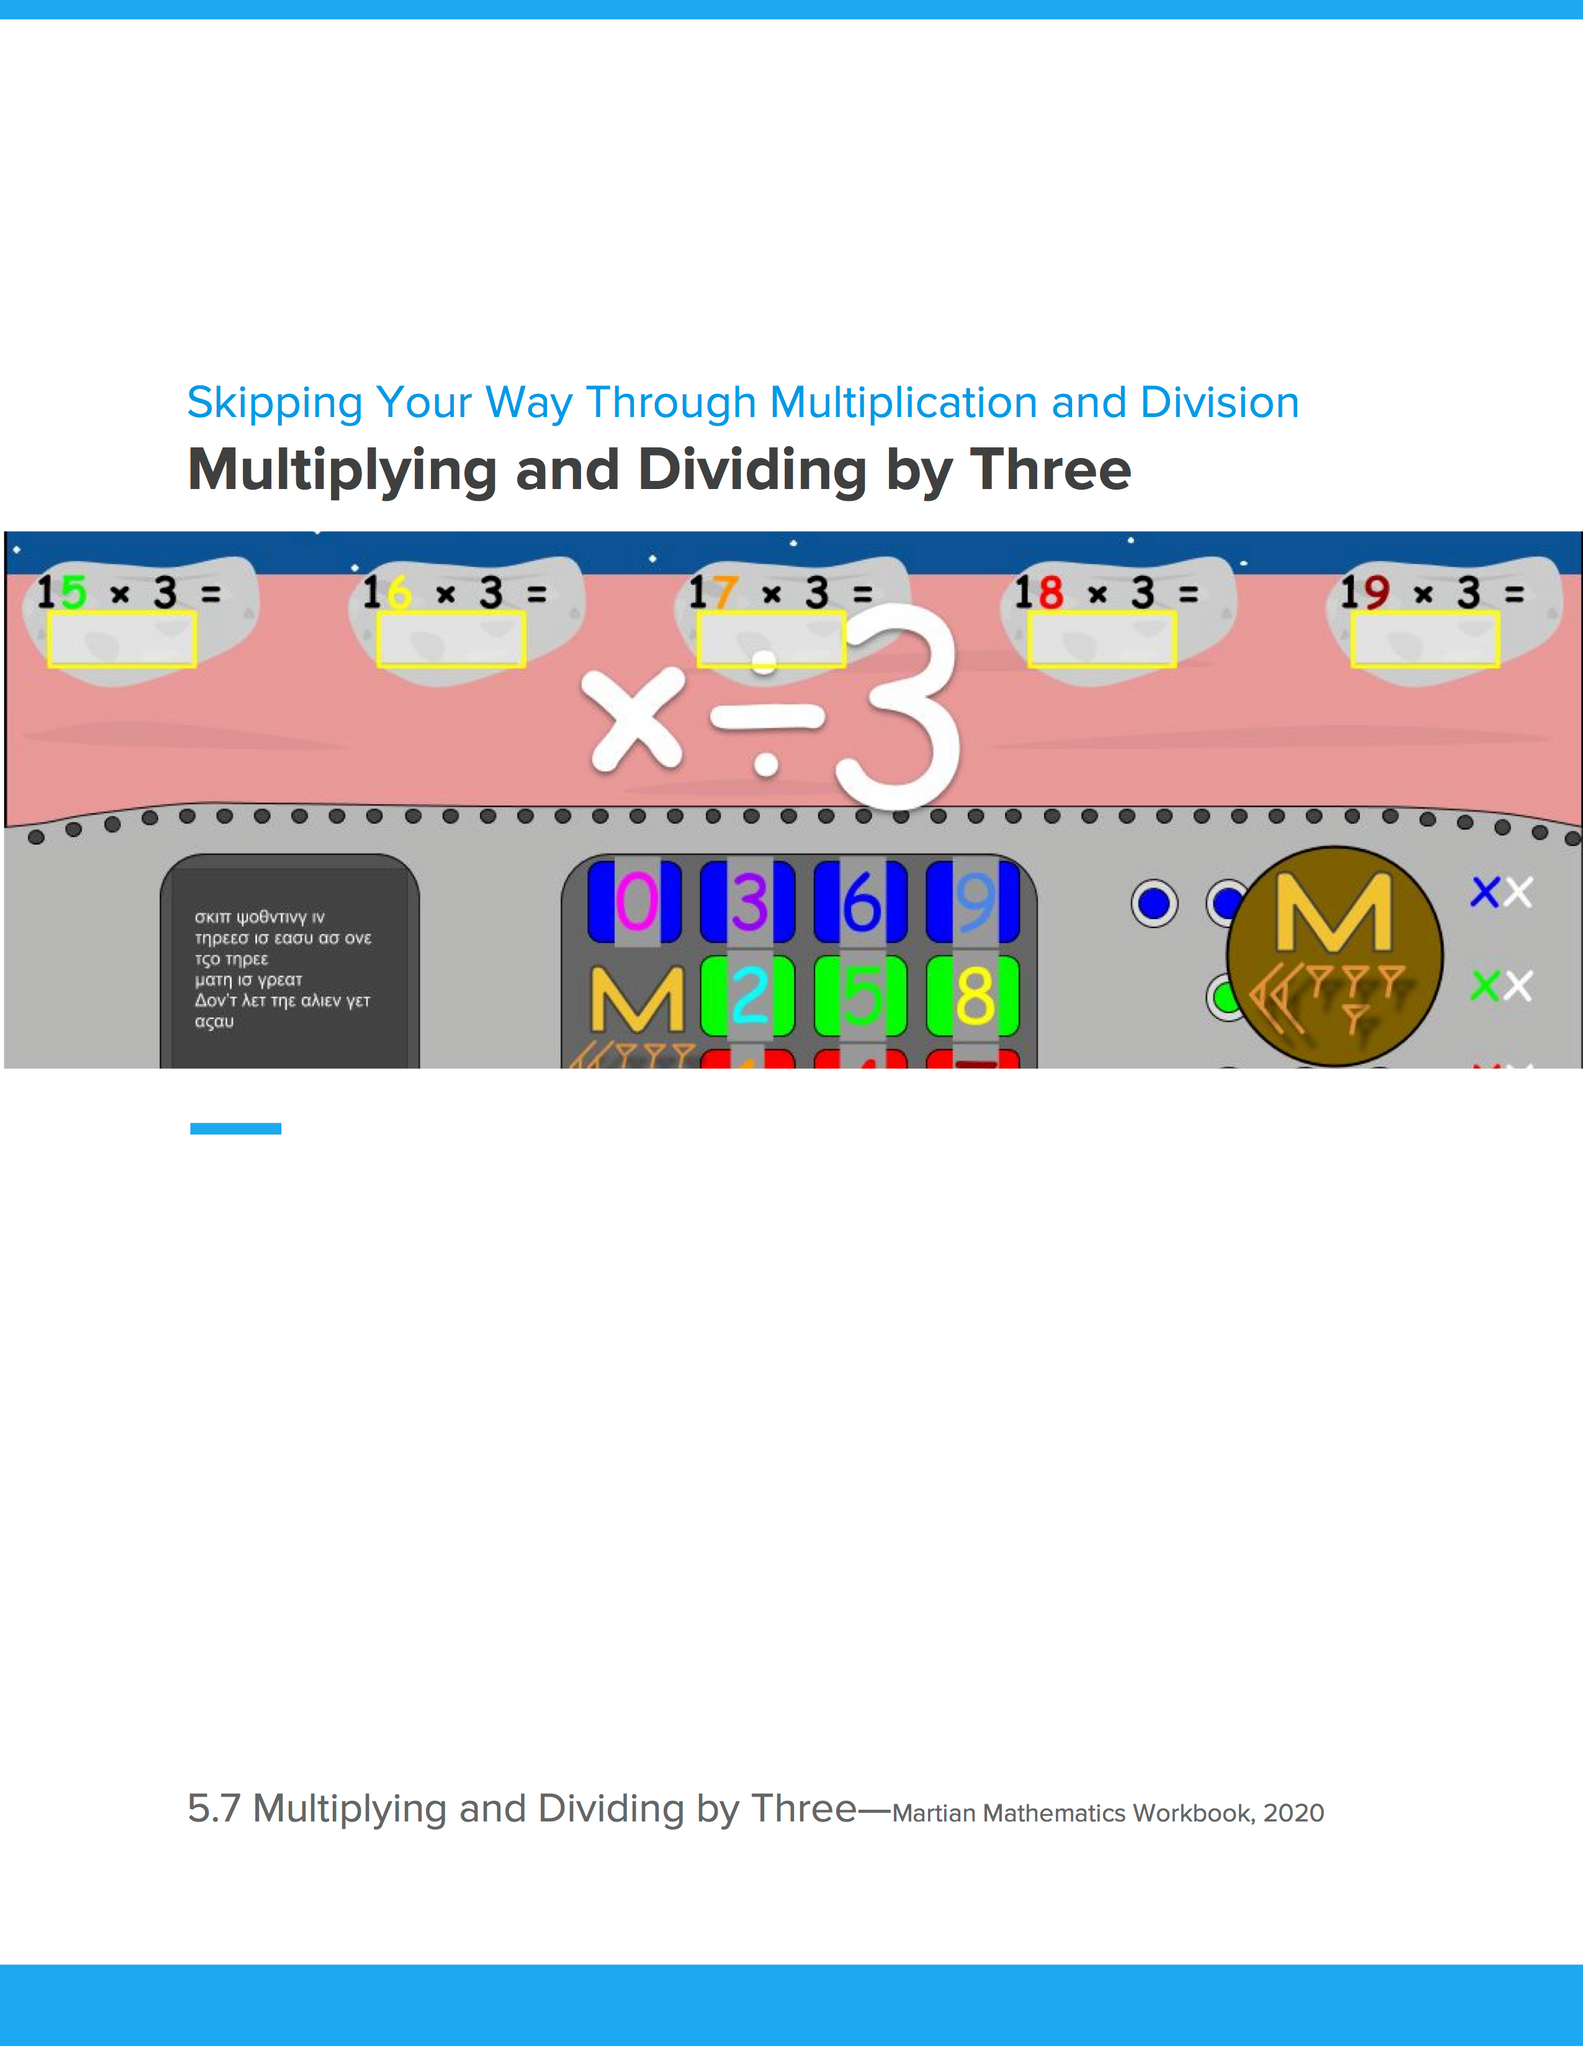 Multiplying and Dividing by Three